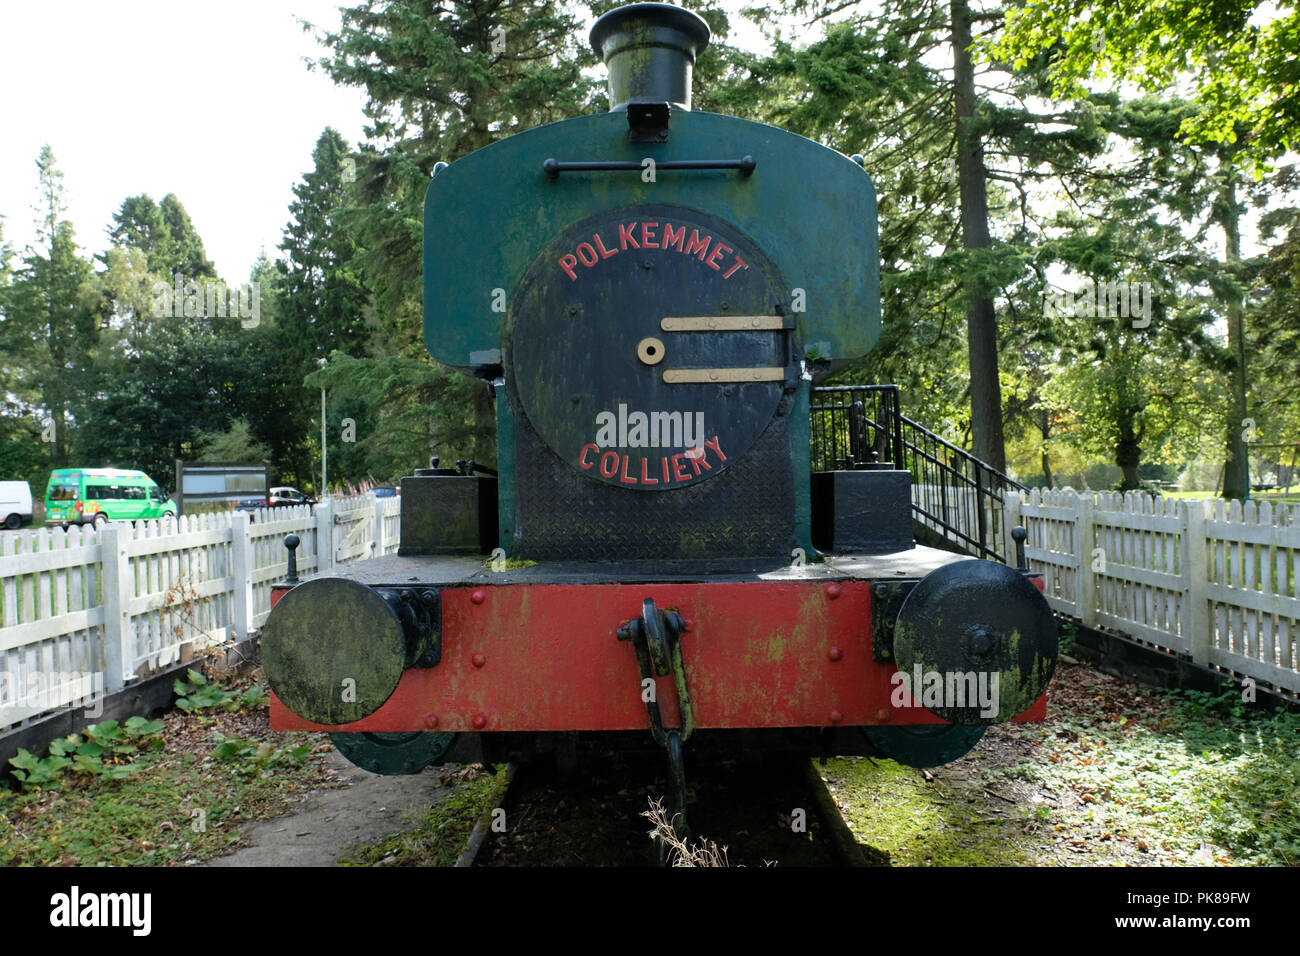 The former NCB locomotive, the 1175 Dardanelles now on display in Polkemmet country park, near Whitburn, West Lothian. Stock Photo